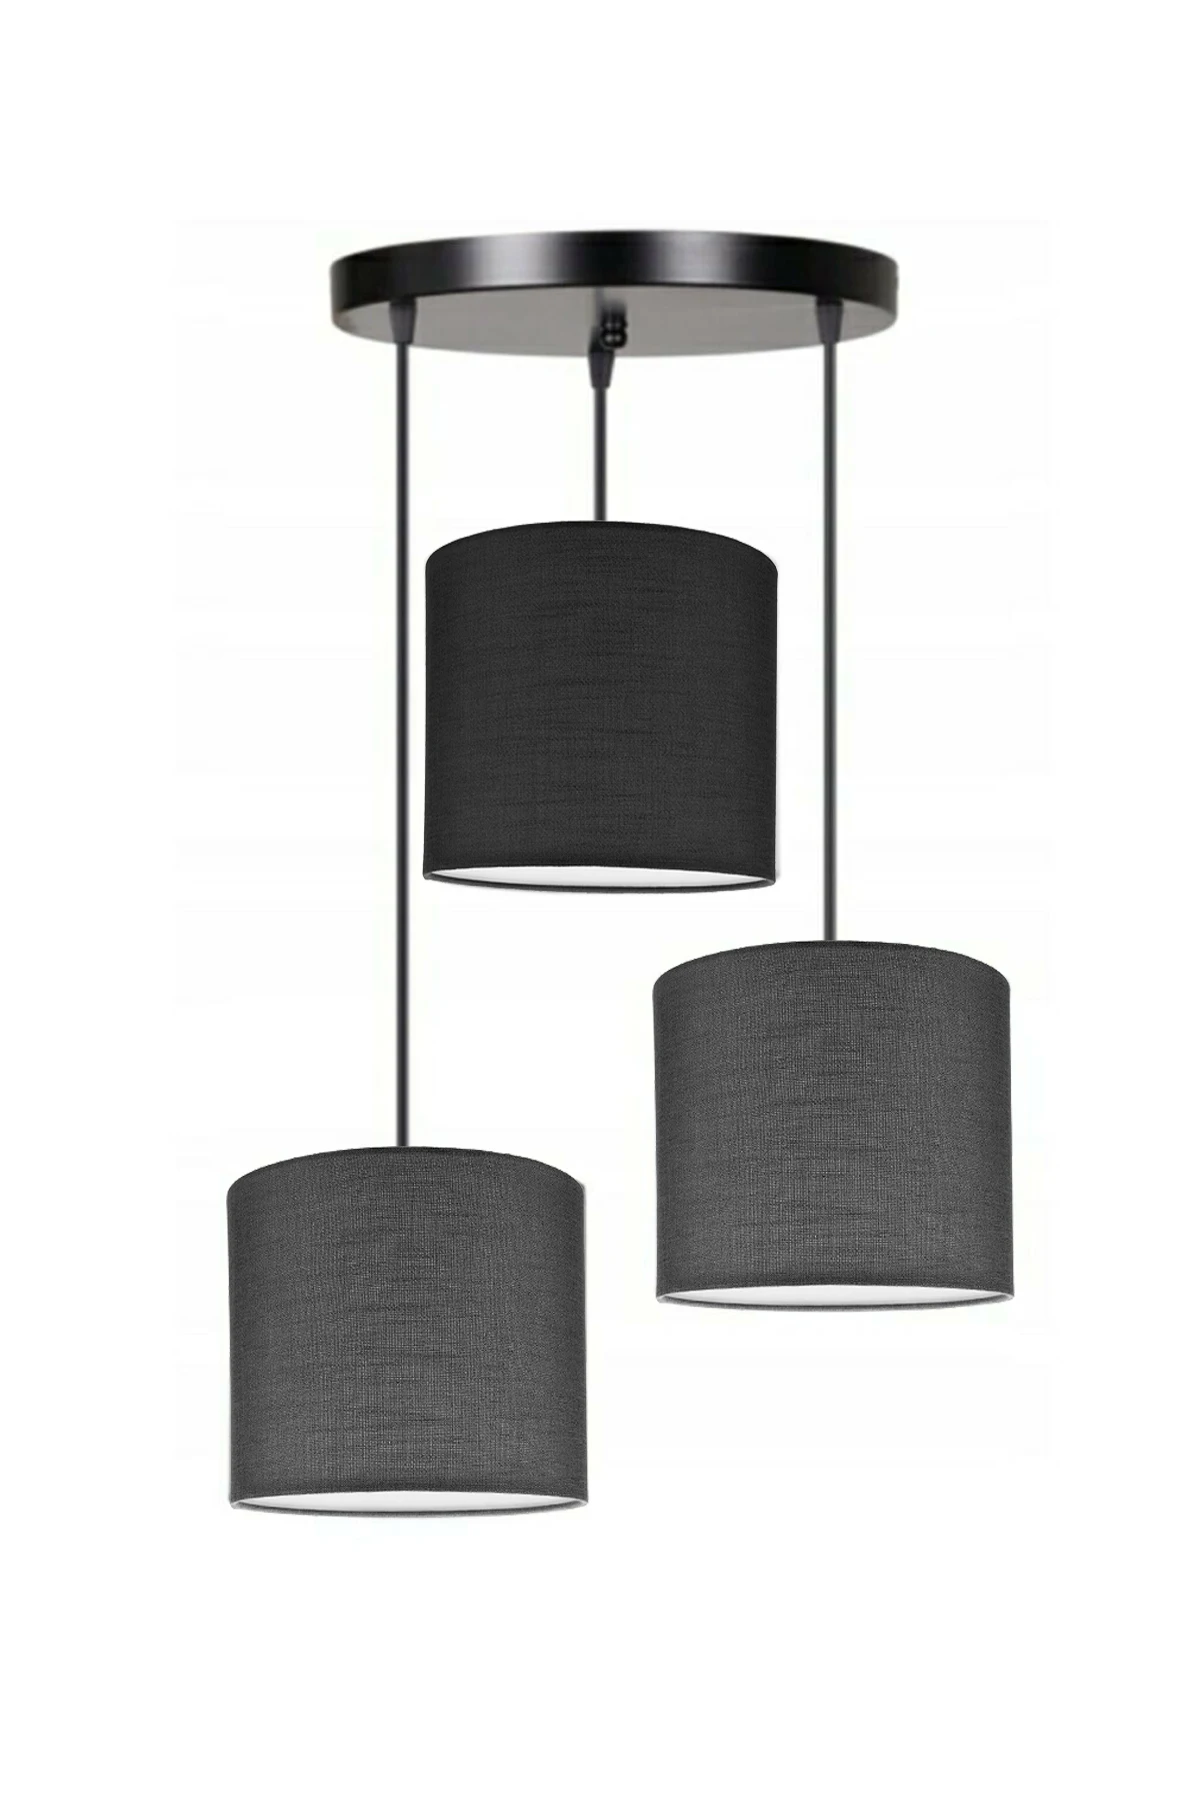 3 Heads 2 Dark Gray 1 Black Cylinder Fabric Lampshade Pendant Lamp Chandelier Modern Decorative Design For Home Hotel Office Use